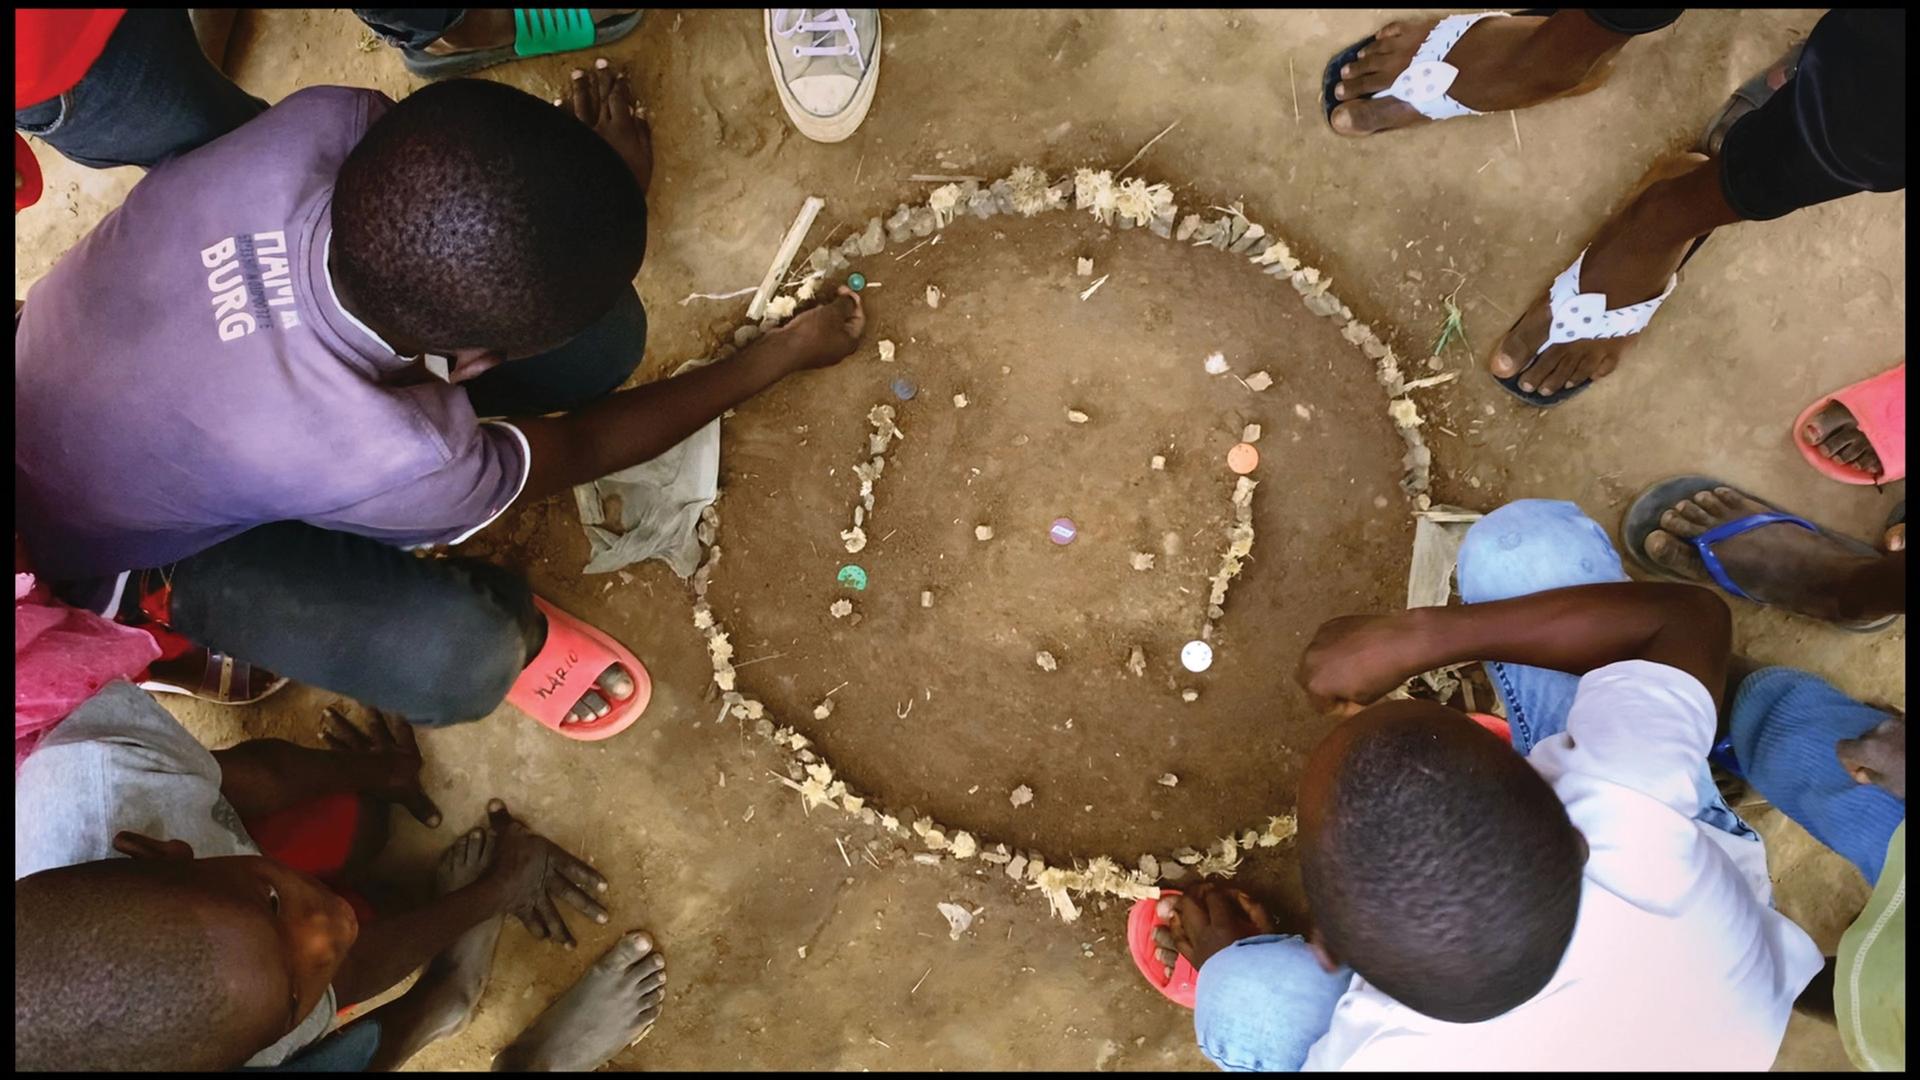 Children in the Democratic Republic of Congo playing a game, in Alÿs’s work for the Biennale © the artist